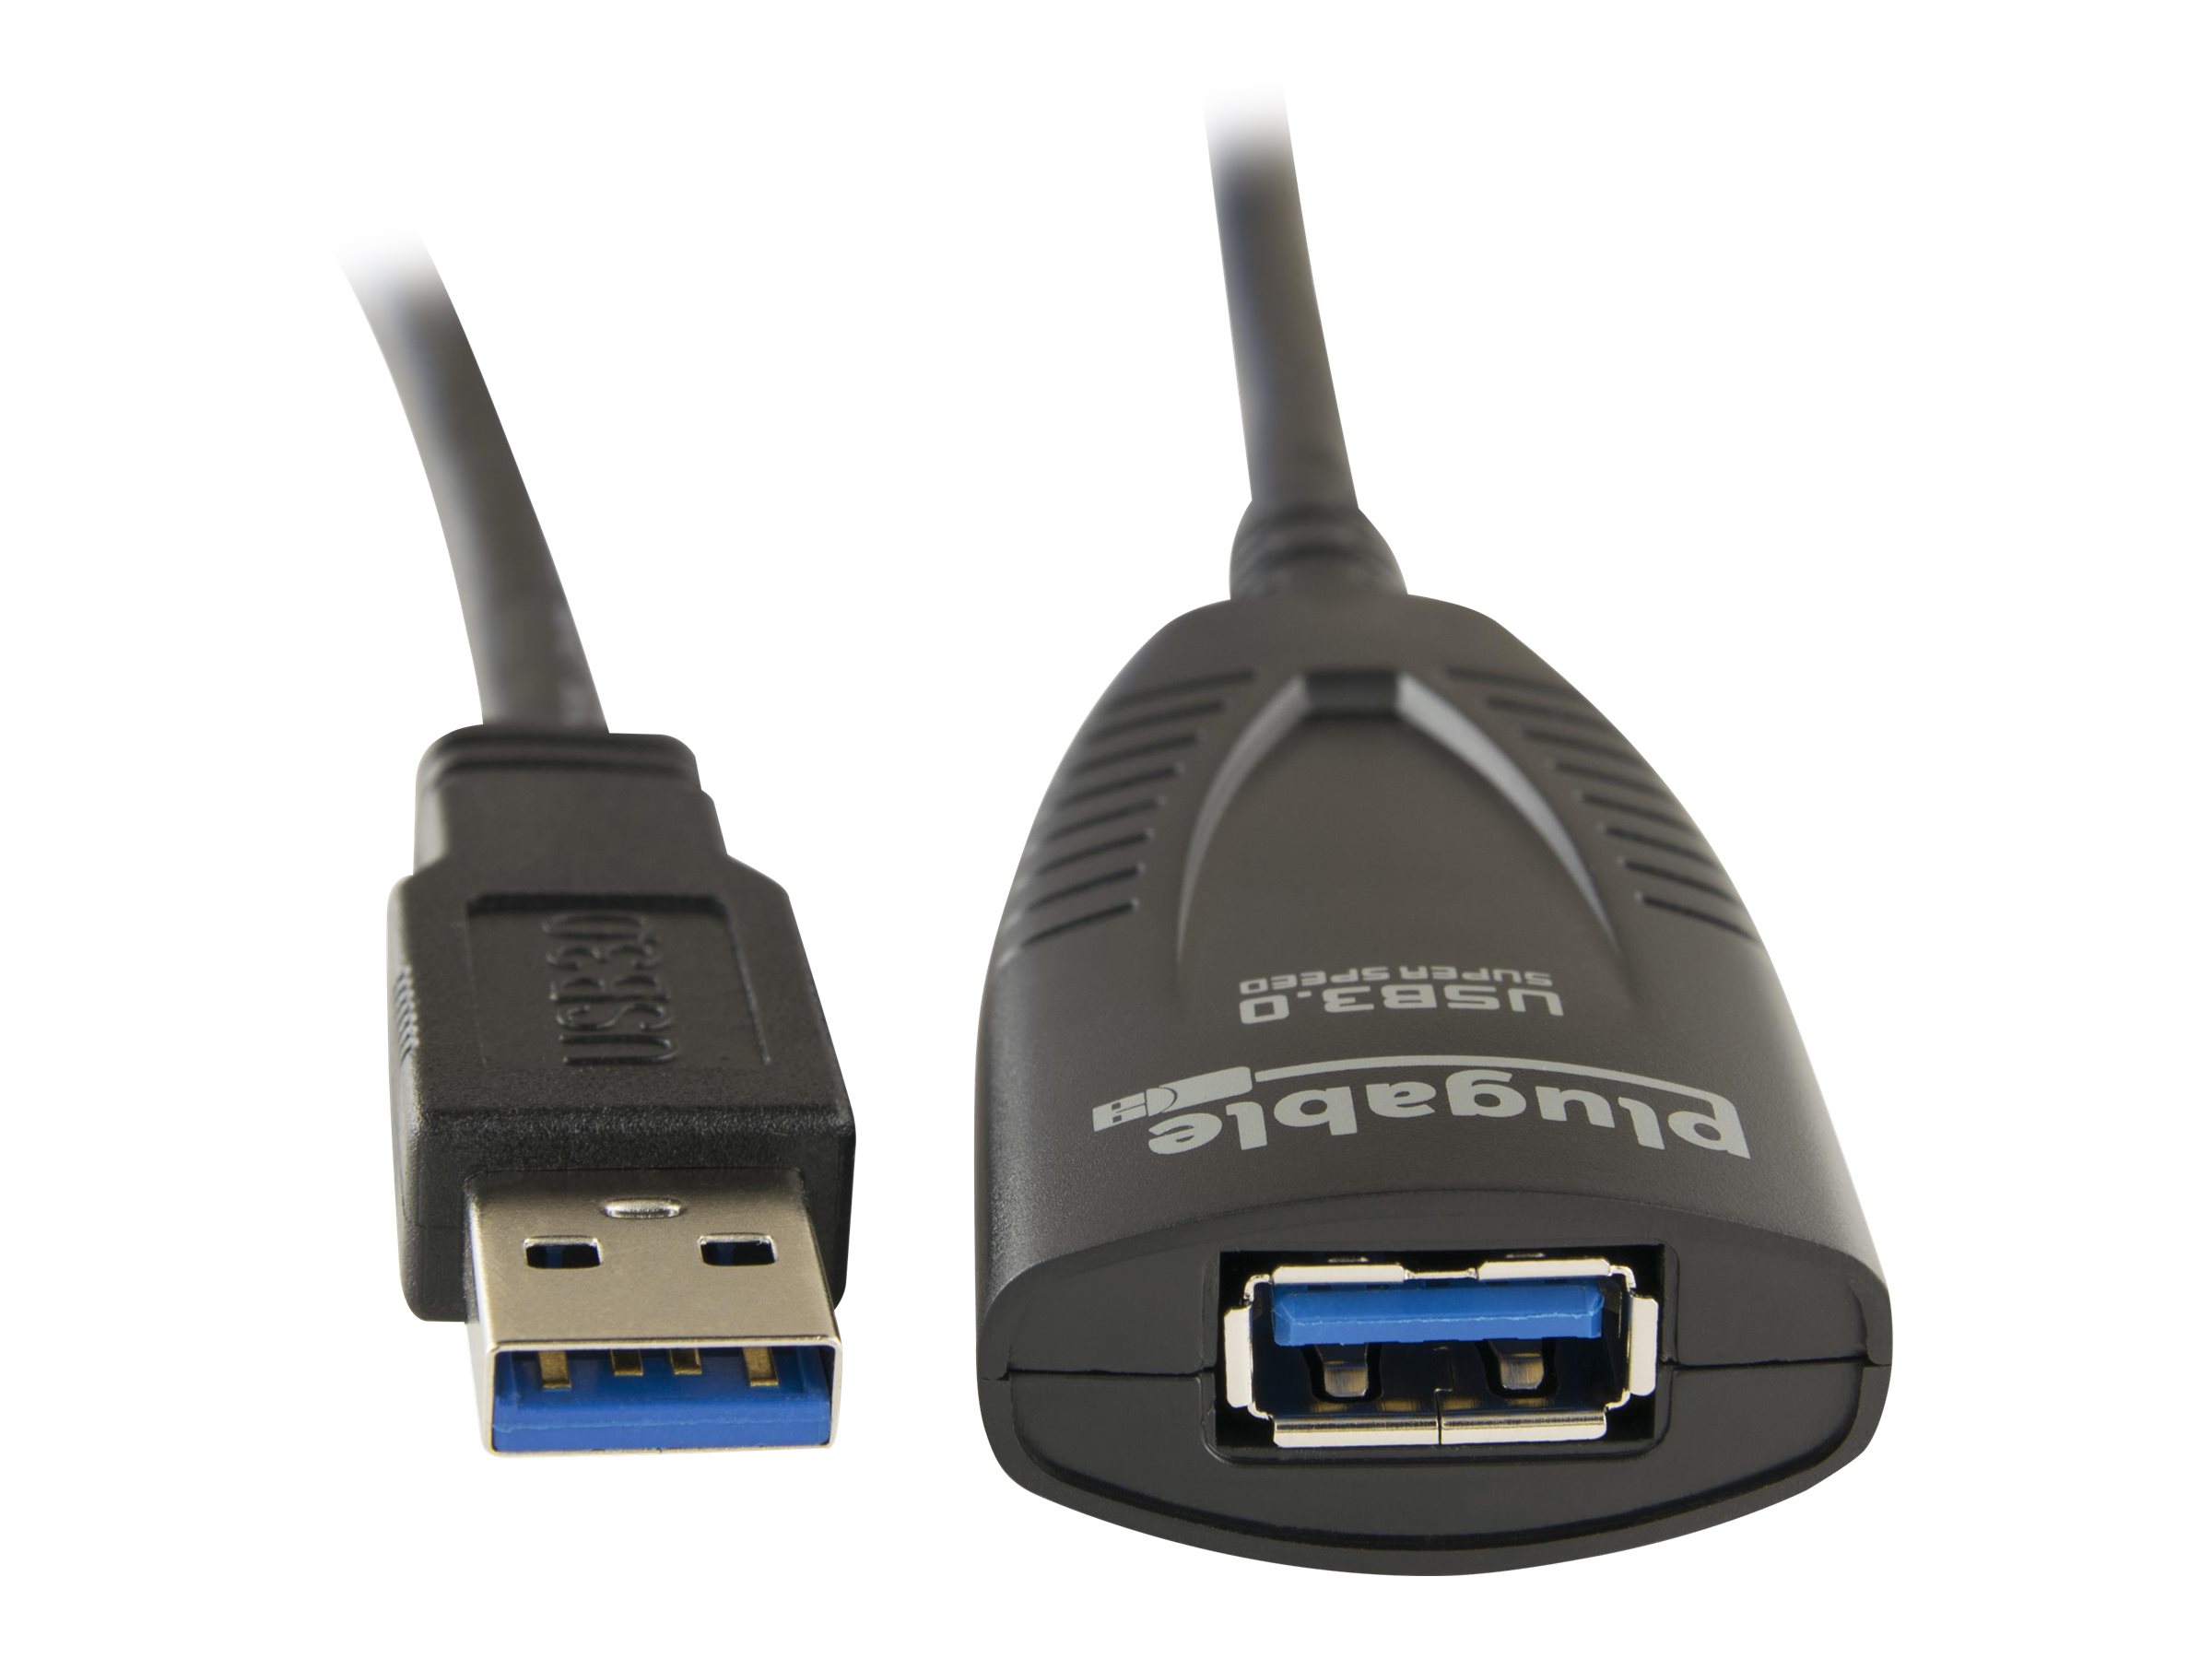 Plugable 5 Meter (16 Foot) USB 3.0 Active Extension Cable with AC Power Adapter and Back-Voltage Protection - image 1 of 6